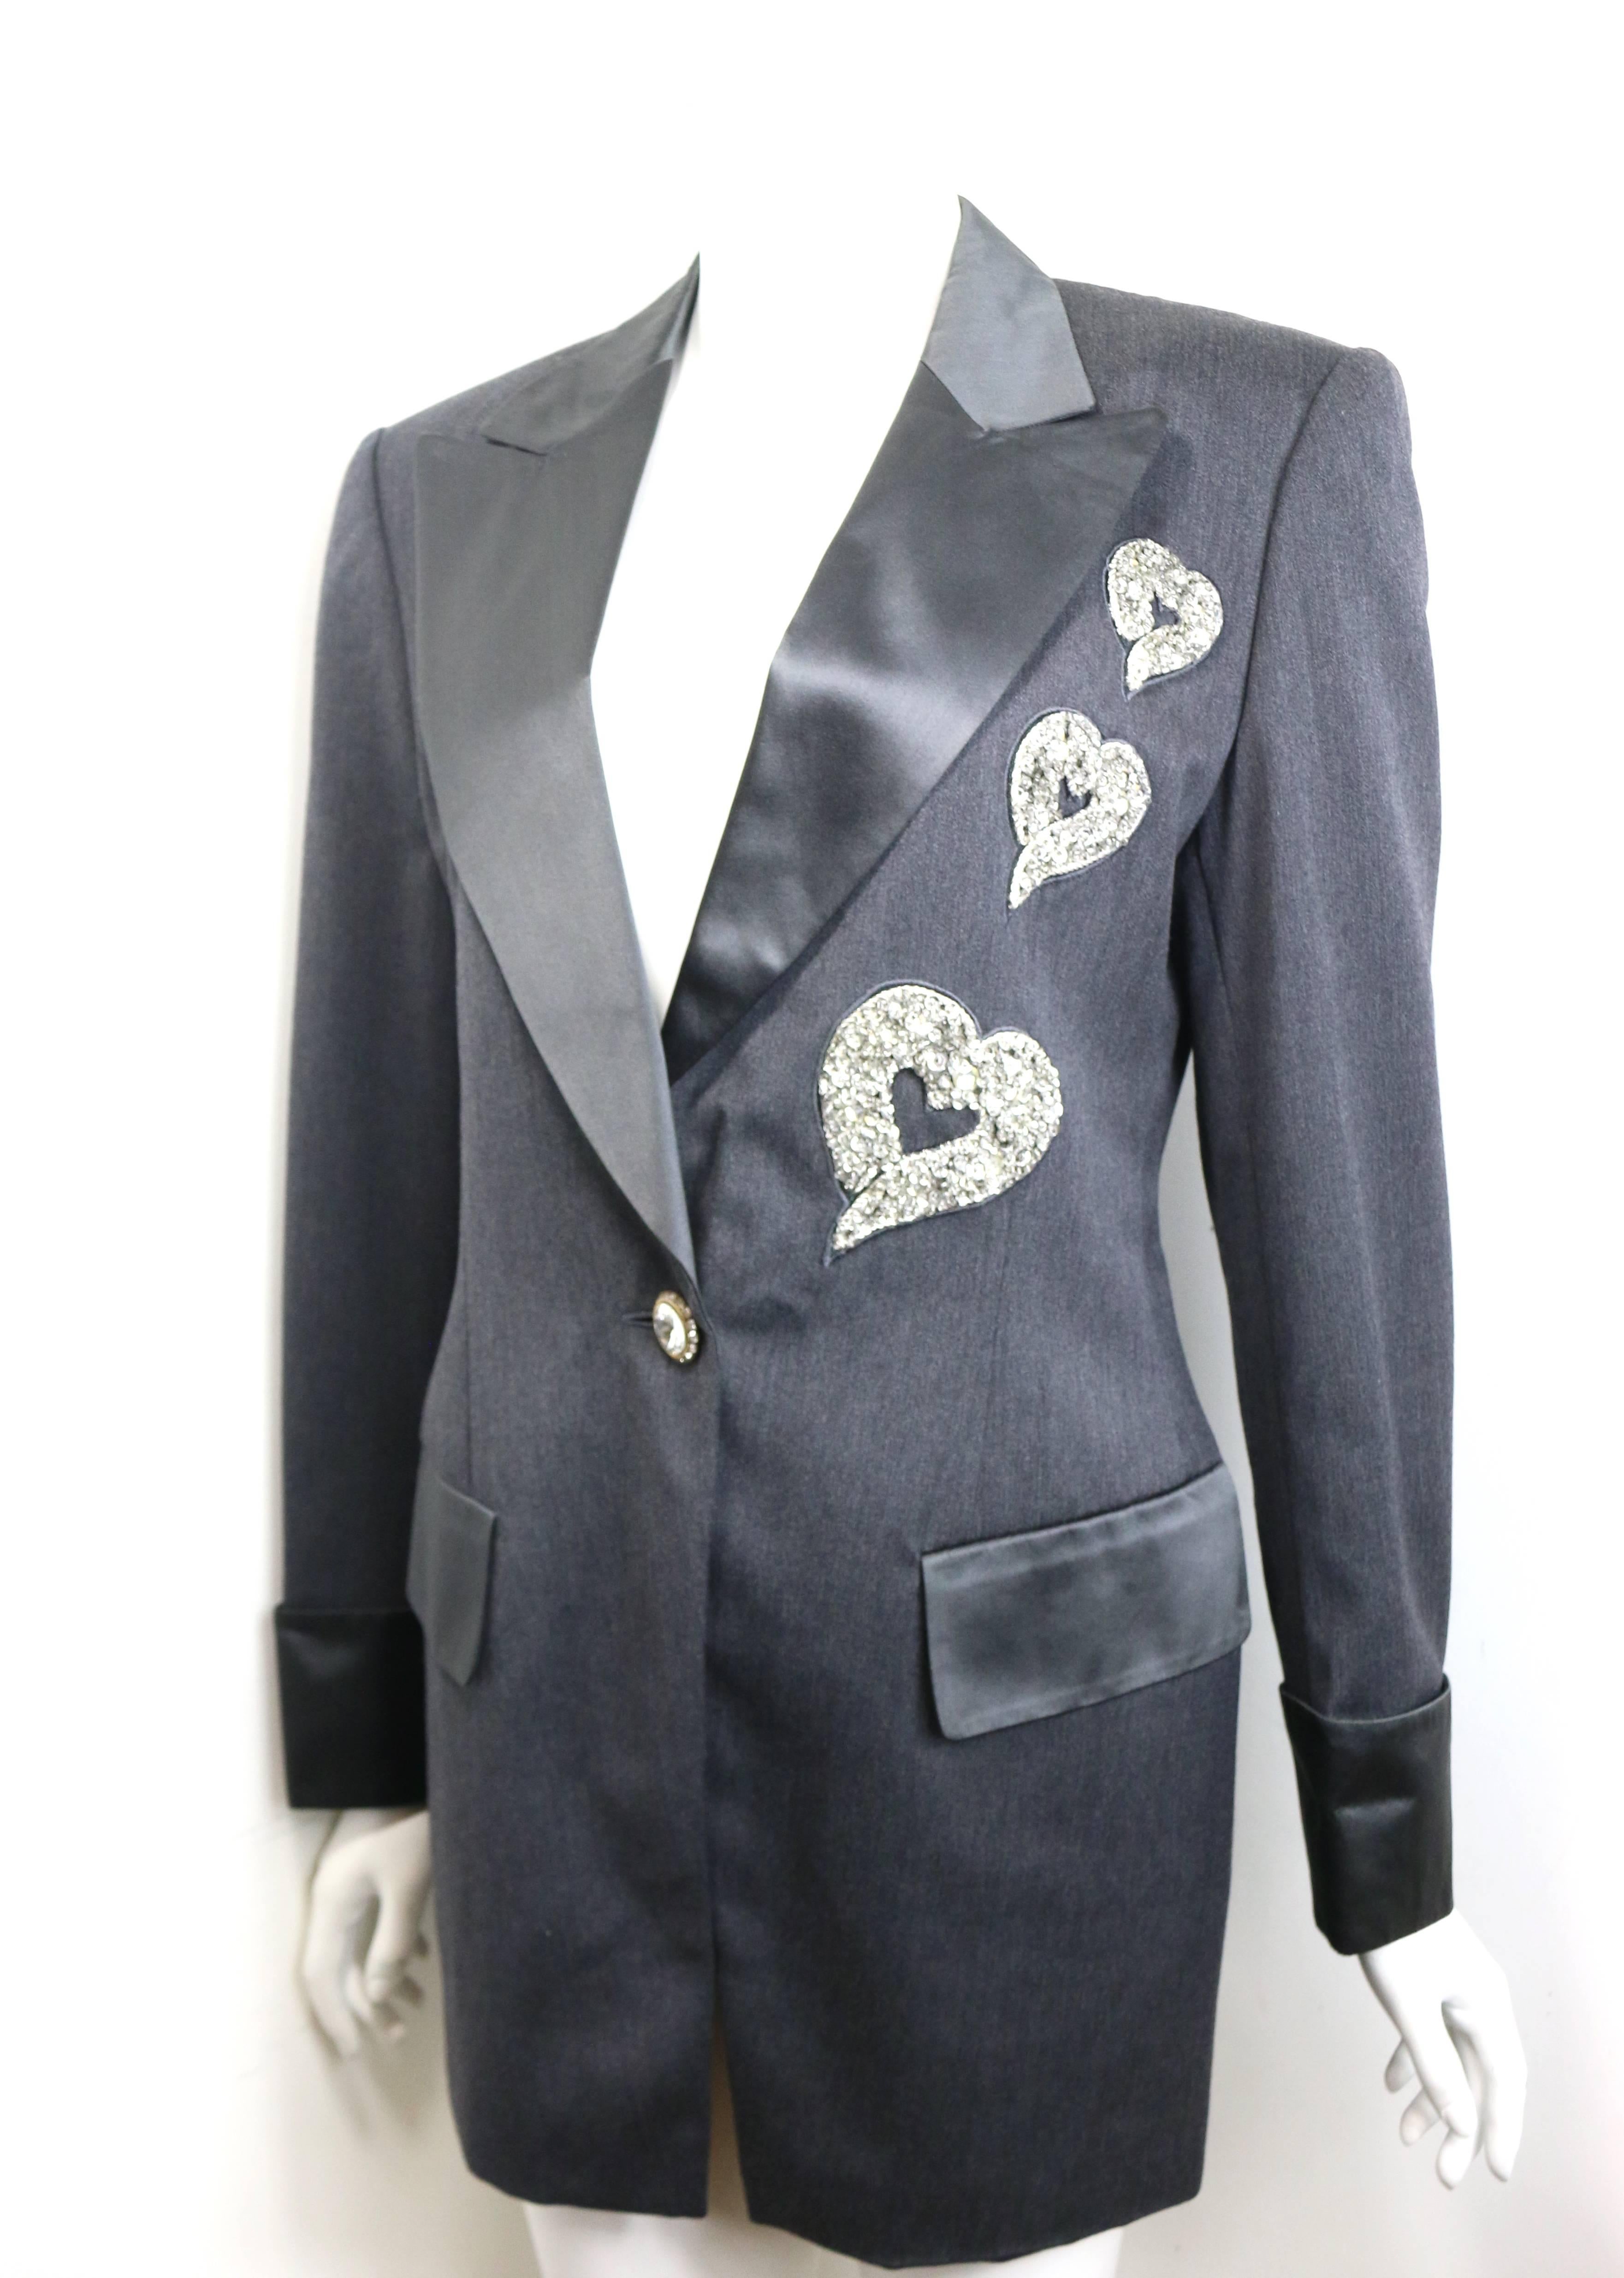 - Vintage 80s Escada by Margaretha Ley grey wool jacket. 

- Featuring silk piping lapel, cuffs and pocket flaps. 

- Three different sizes of embroidered silver sequins hearts. 

- Front and cuff gold toned rhinestones buttons closure. 

- Size 36.